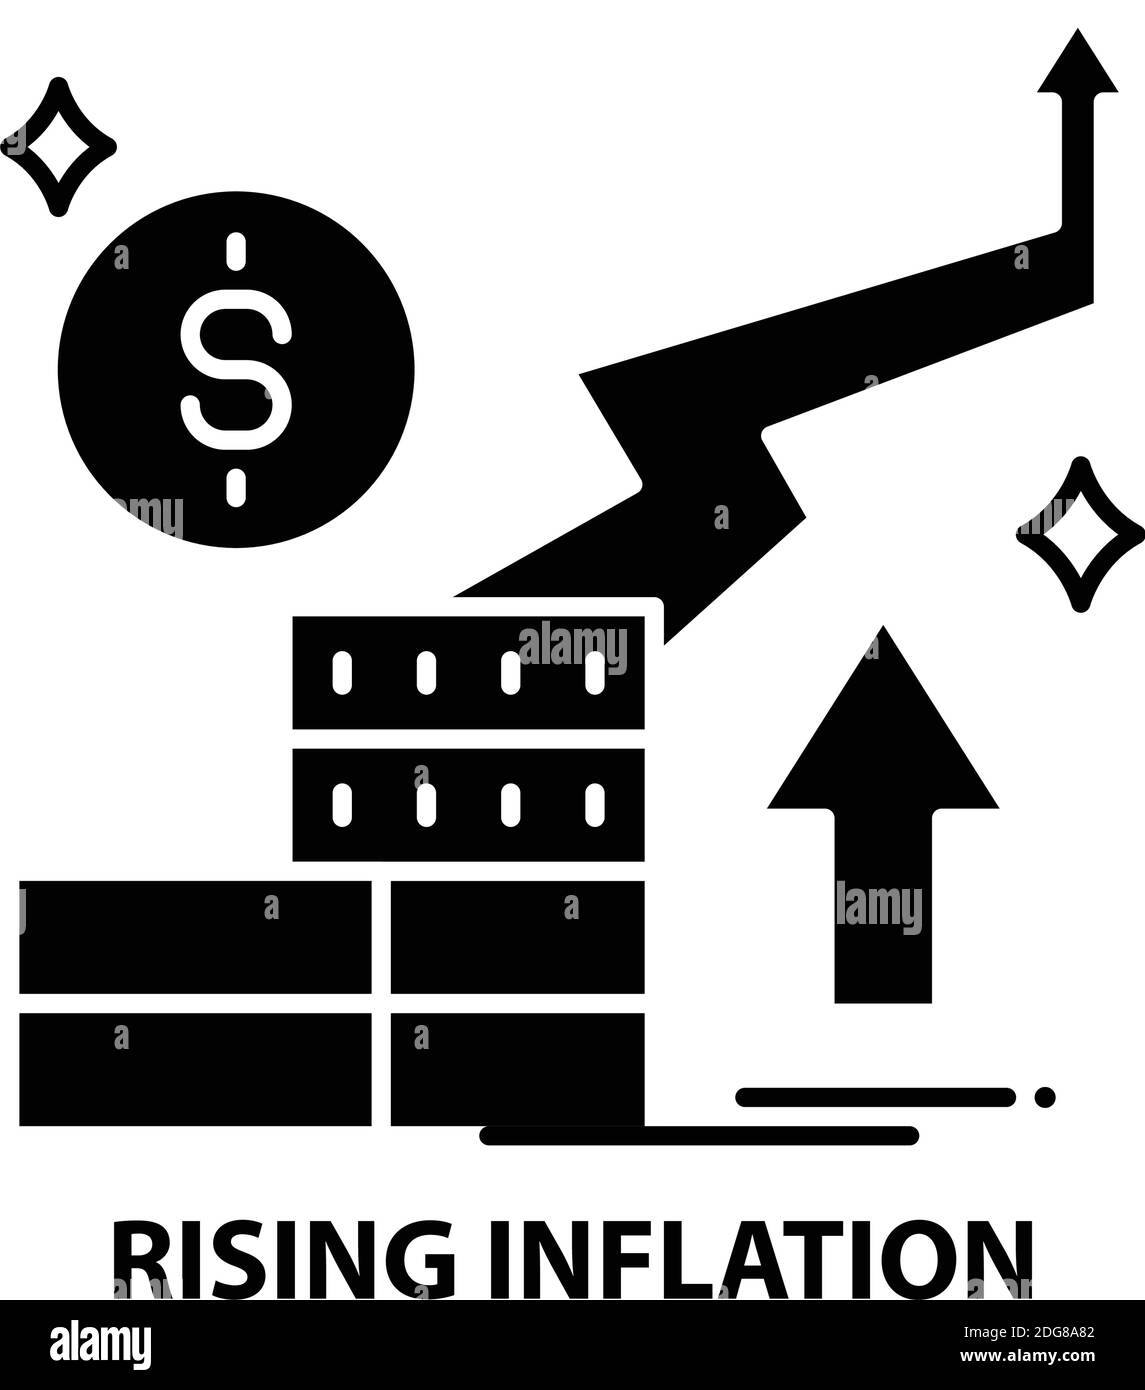 rising inflation icon, black vector sign with editable strokes, concept illustration Stock Vector